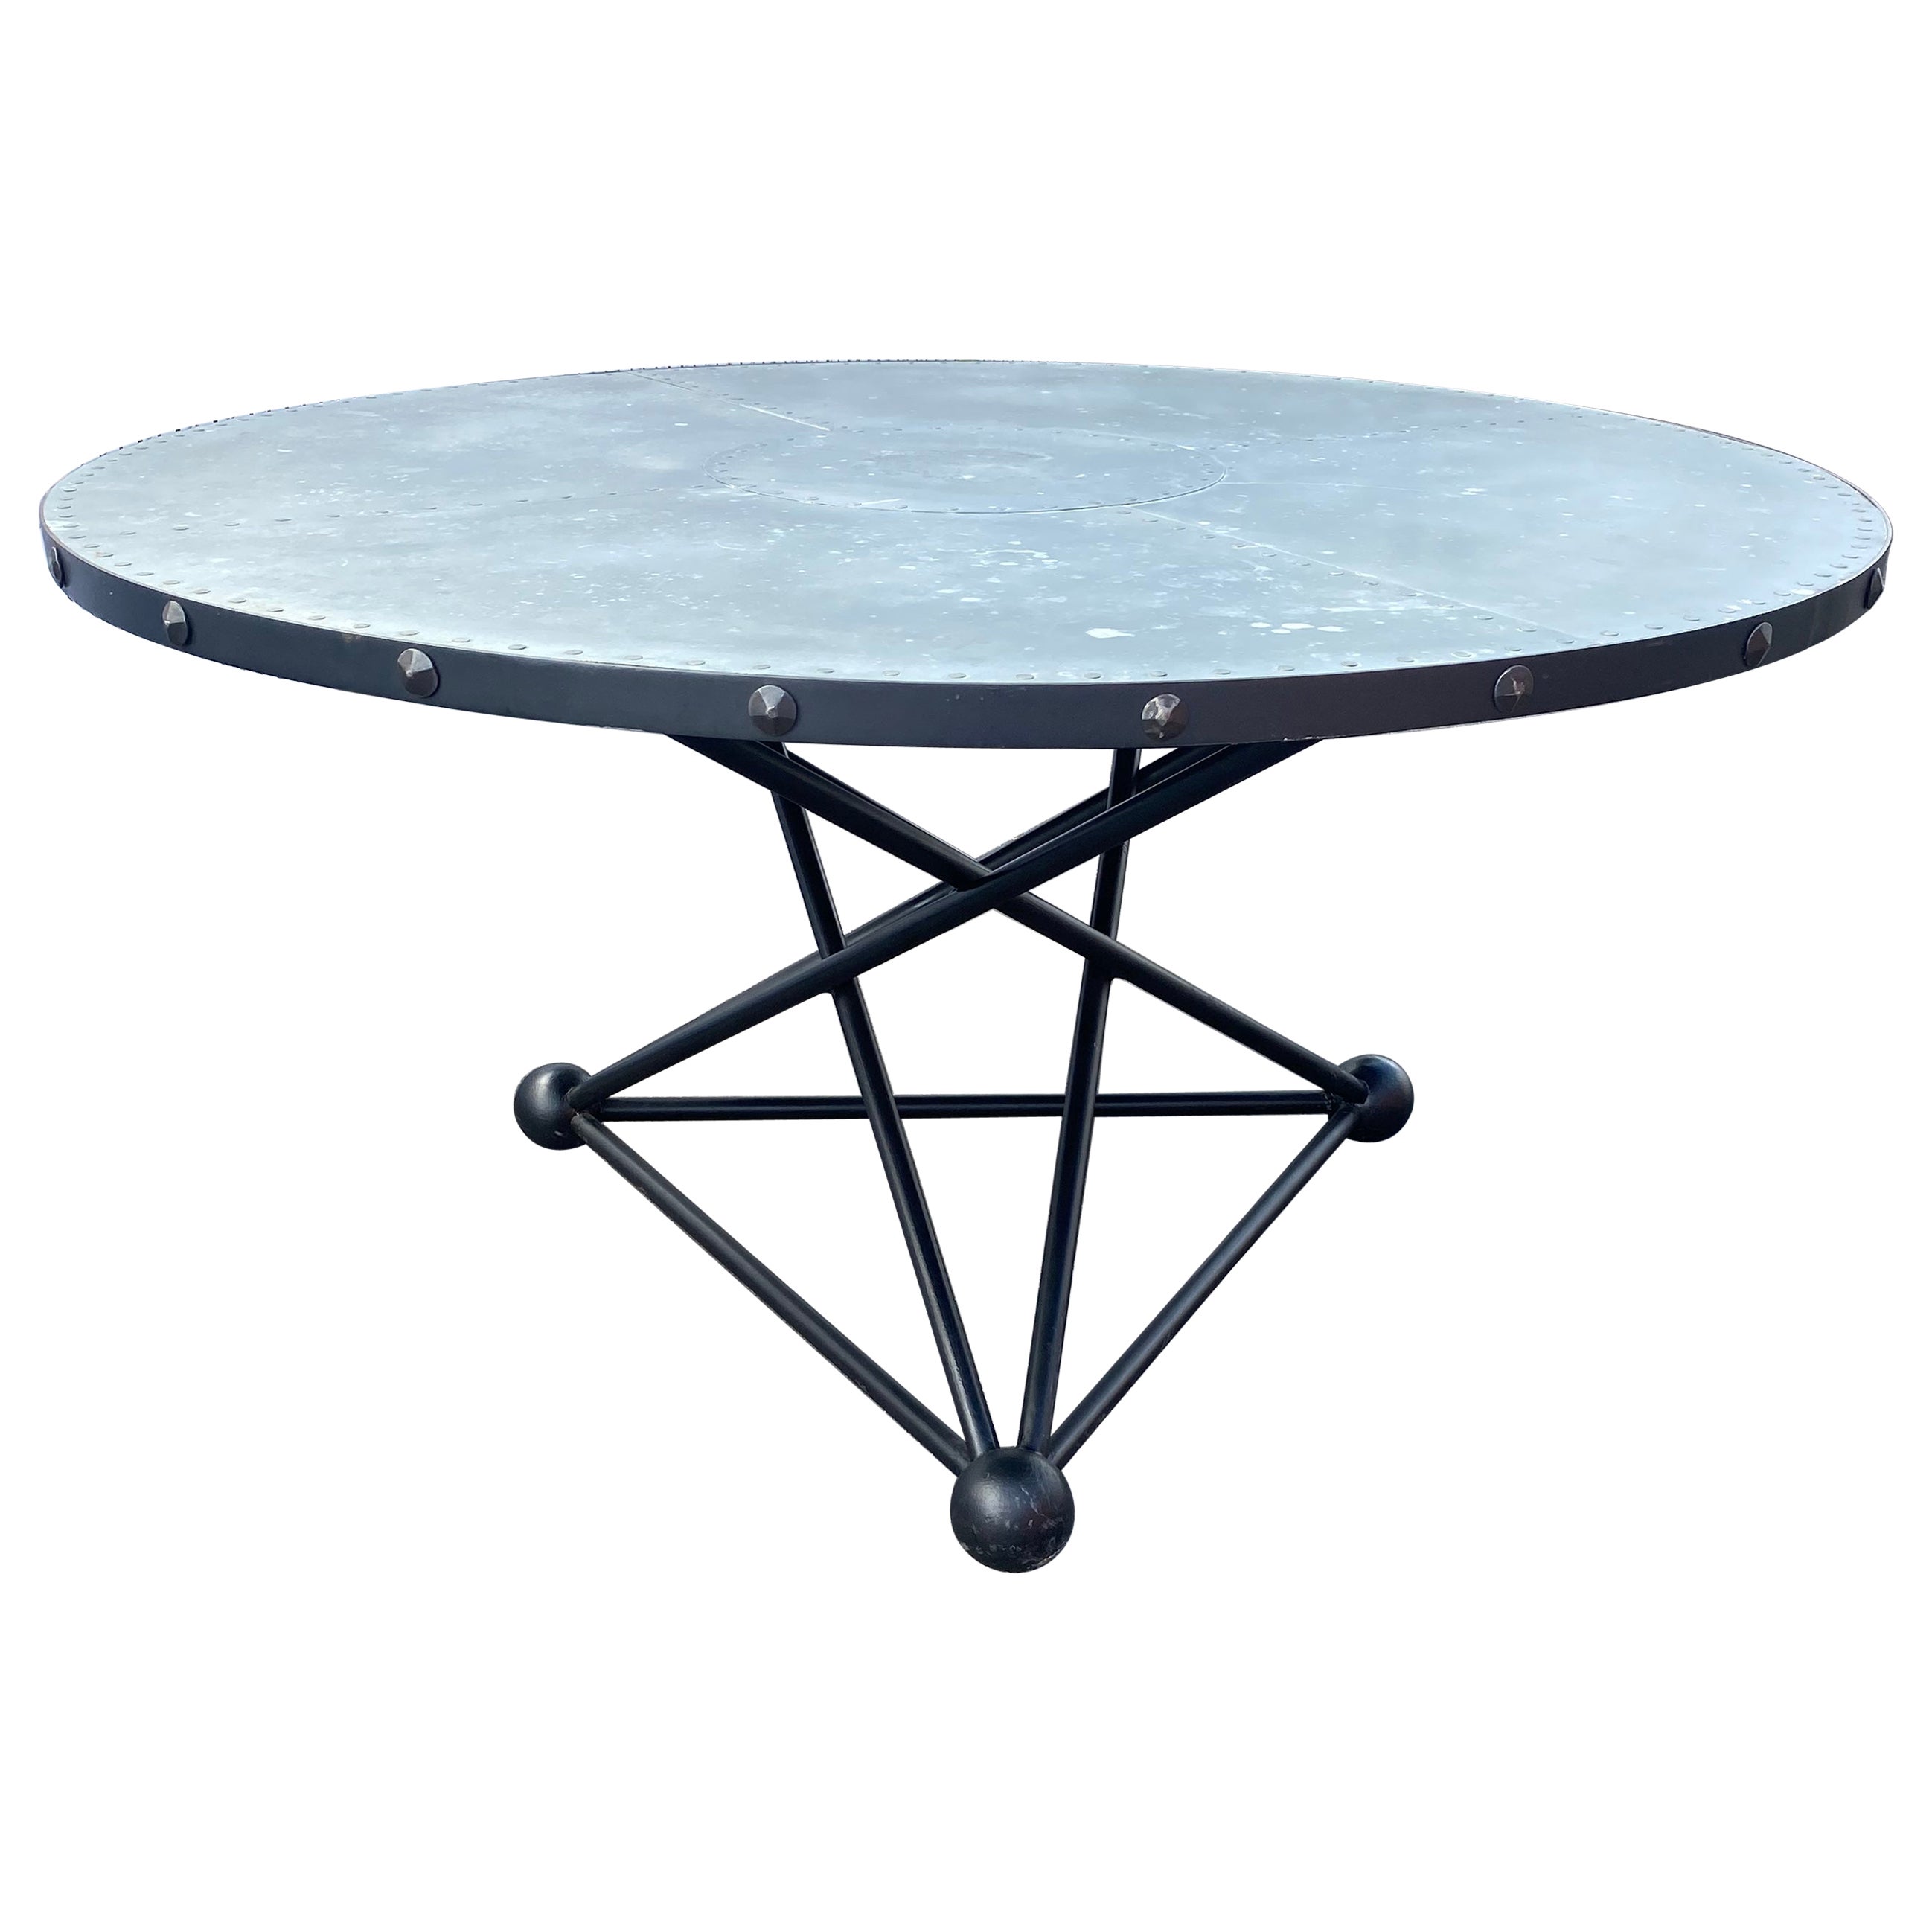 1980s Industrial Geometrical Sculptural Steel Zinc Wood Round Dining Table For Sale